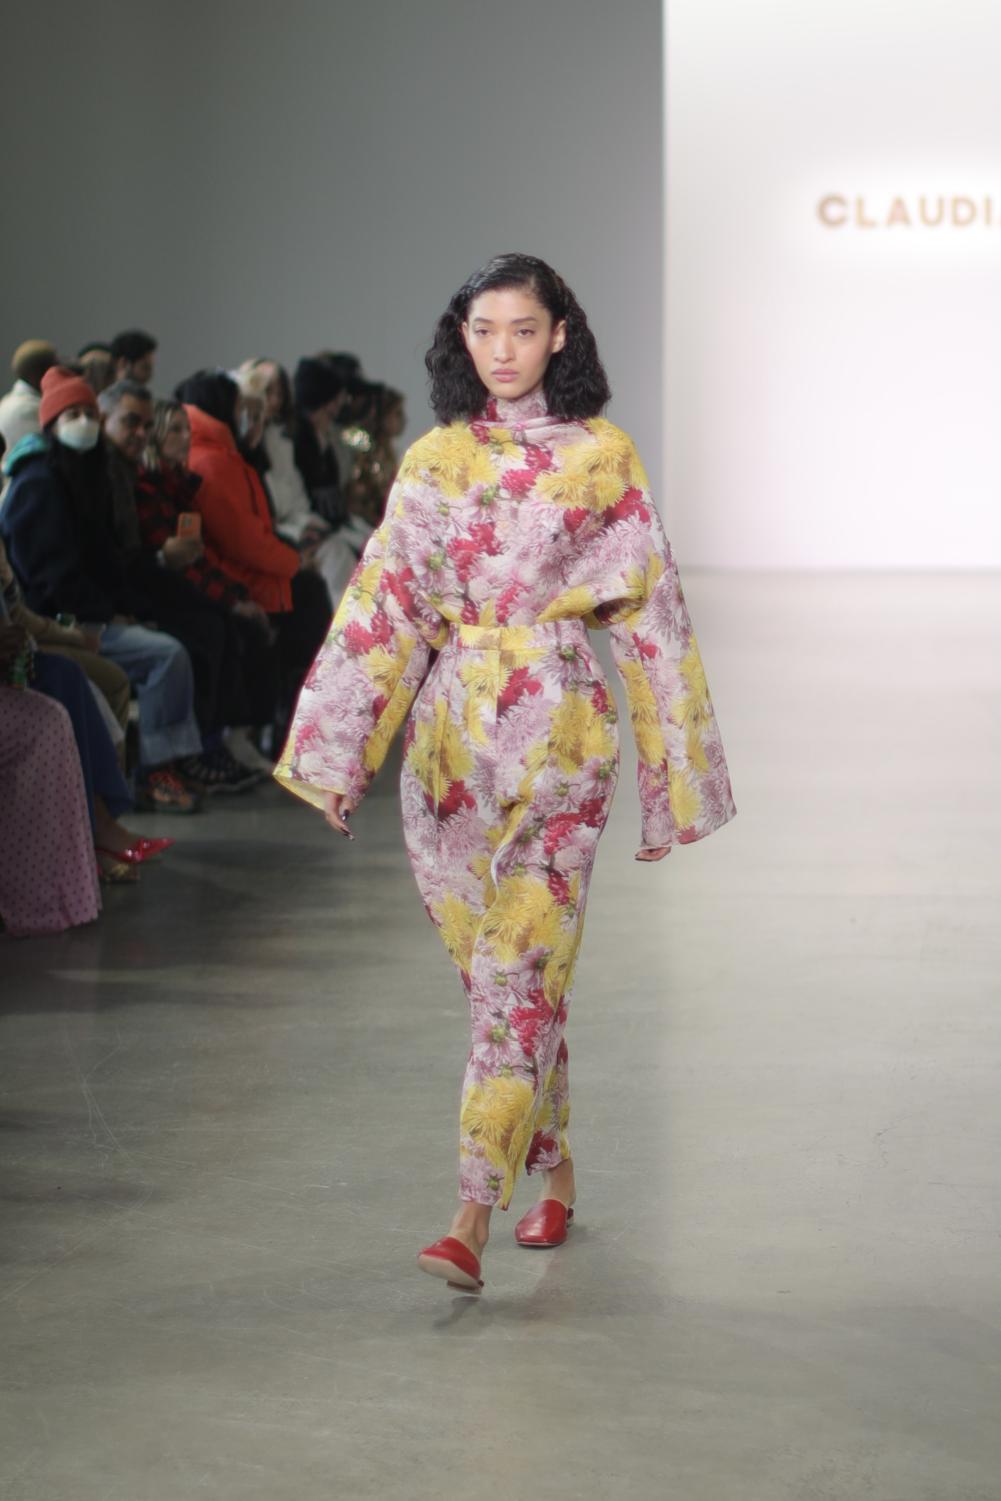 Claudia+Li+brings+another+quirky%2C+playful+collection+to+Fashion+Week